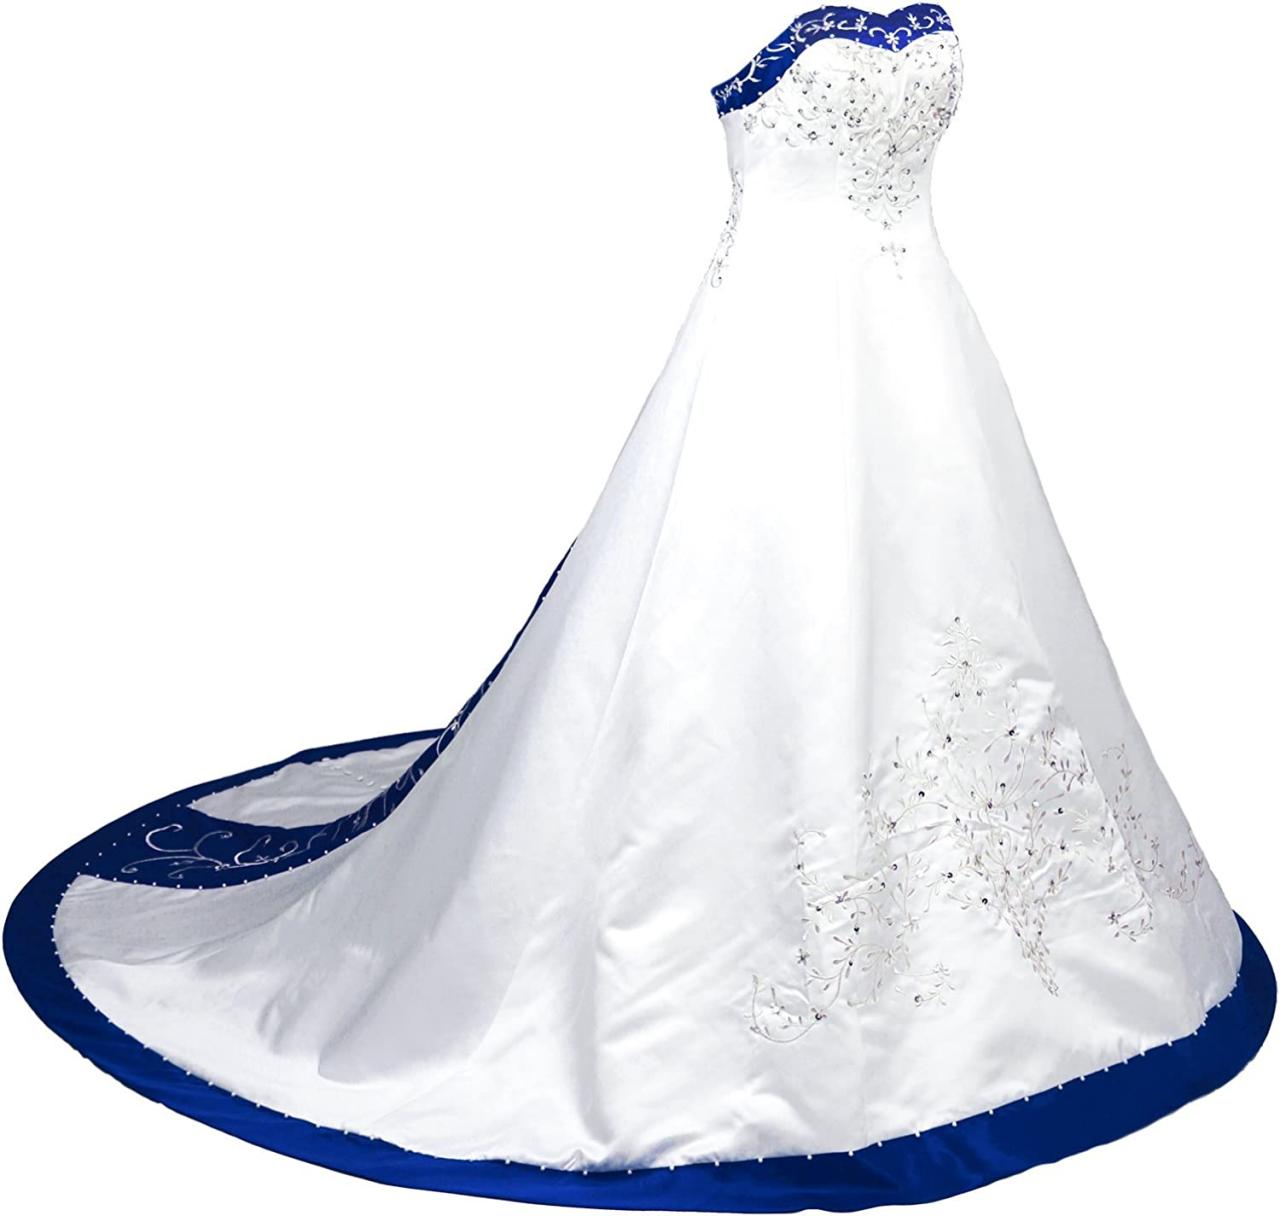 Sweetheart White Royal Blue Embroidered Wedding Dress Gown